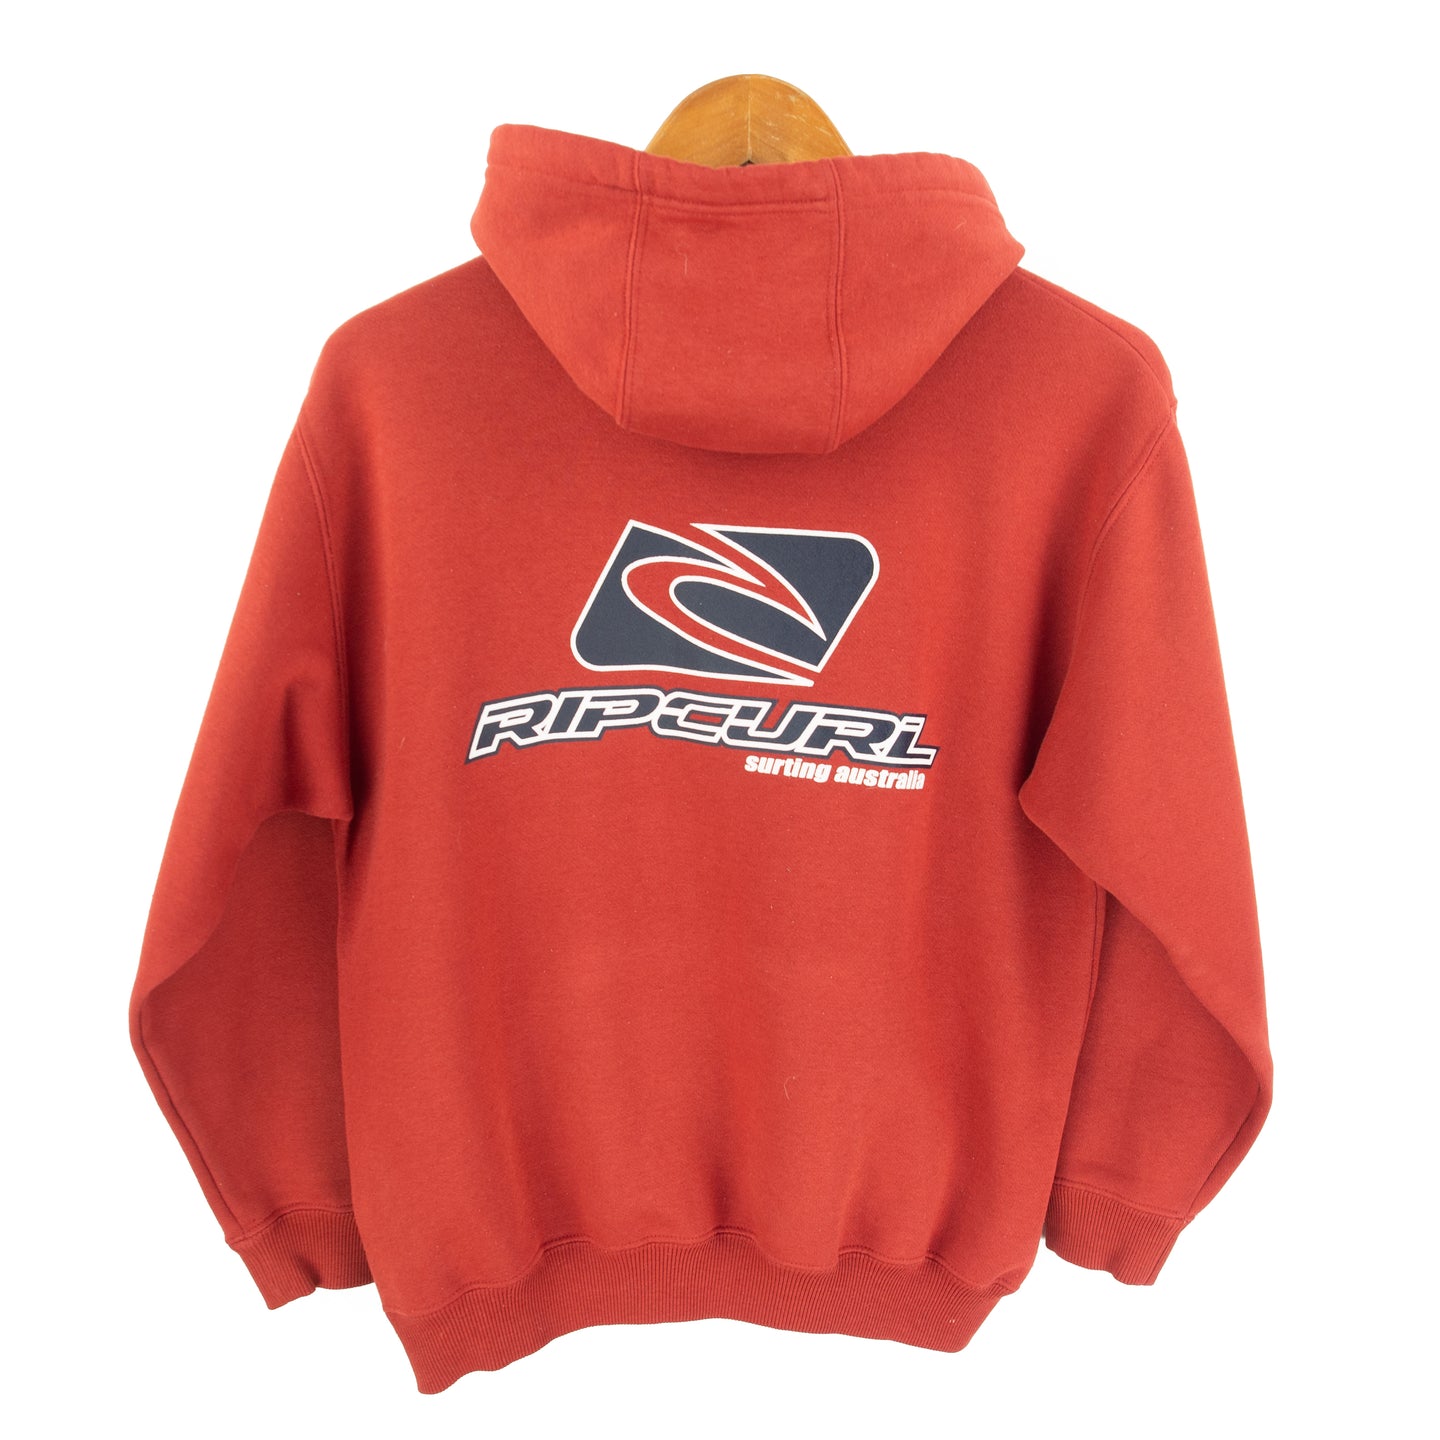 VINTAGE RIPCURL DOUBLE SIDED HOODIE - WMNS S/M